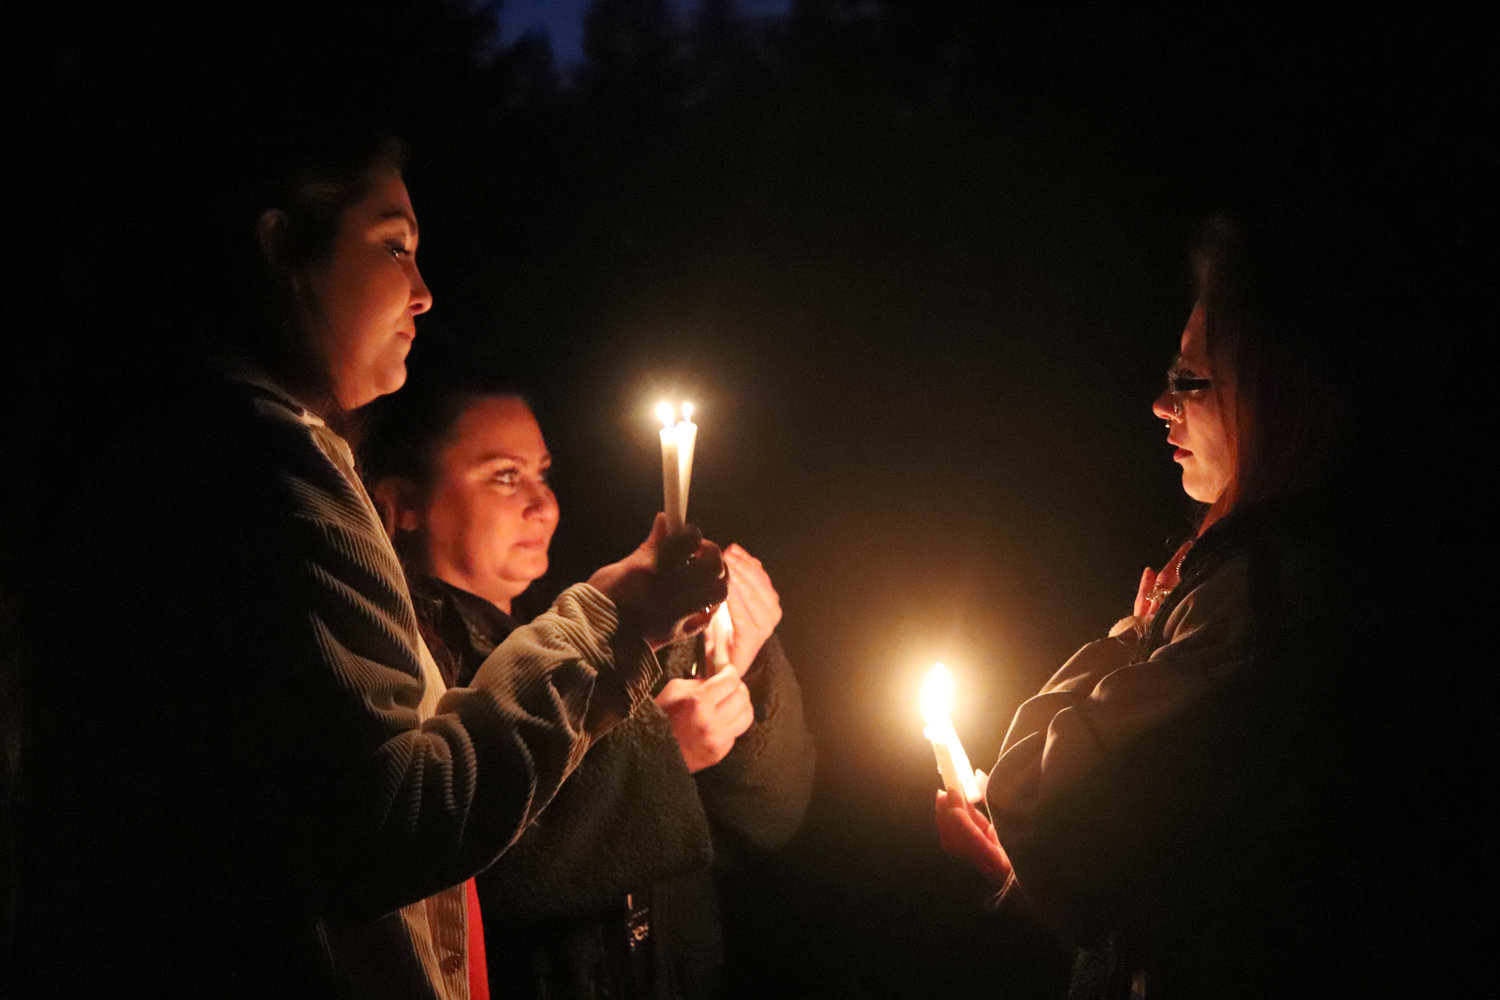 Friends and family of Karlee Bodine’s fiancee, Mitchell Davidson-Link, 33, who died unexpectedly in December, joined in a joint vigil for Davidson-Link and murdered Thurston County woman Karen Bodine near Rochester on Saturday.